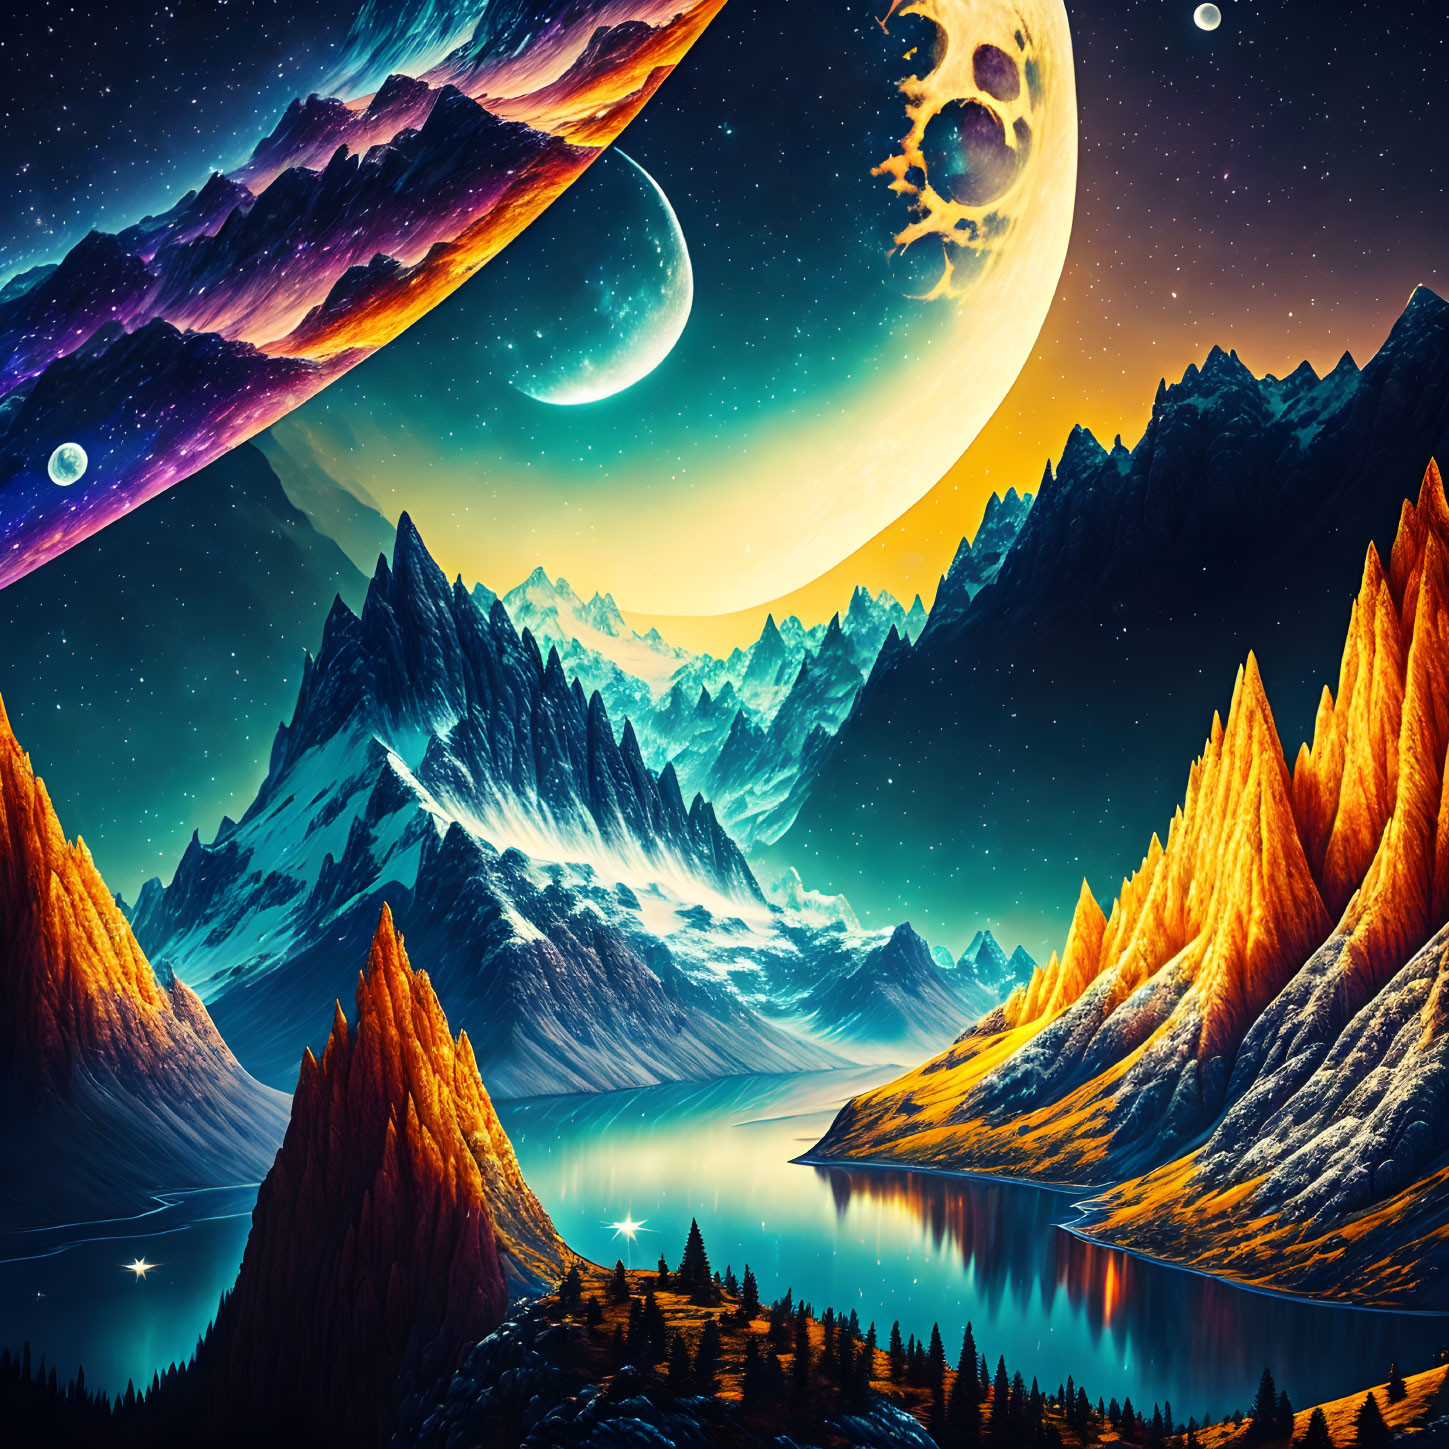 Surreal digital art of towering mountains, reflective lake, fiery trees, and fantastical sky